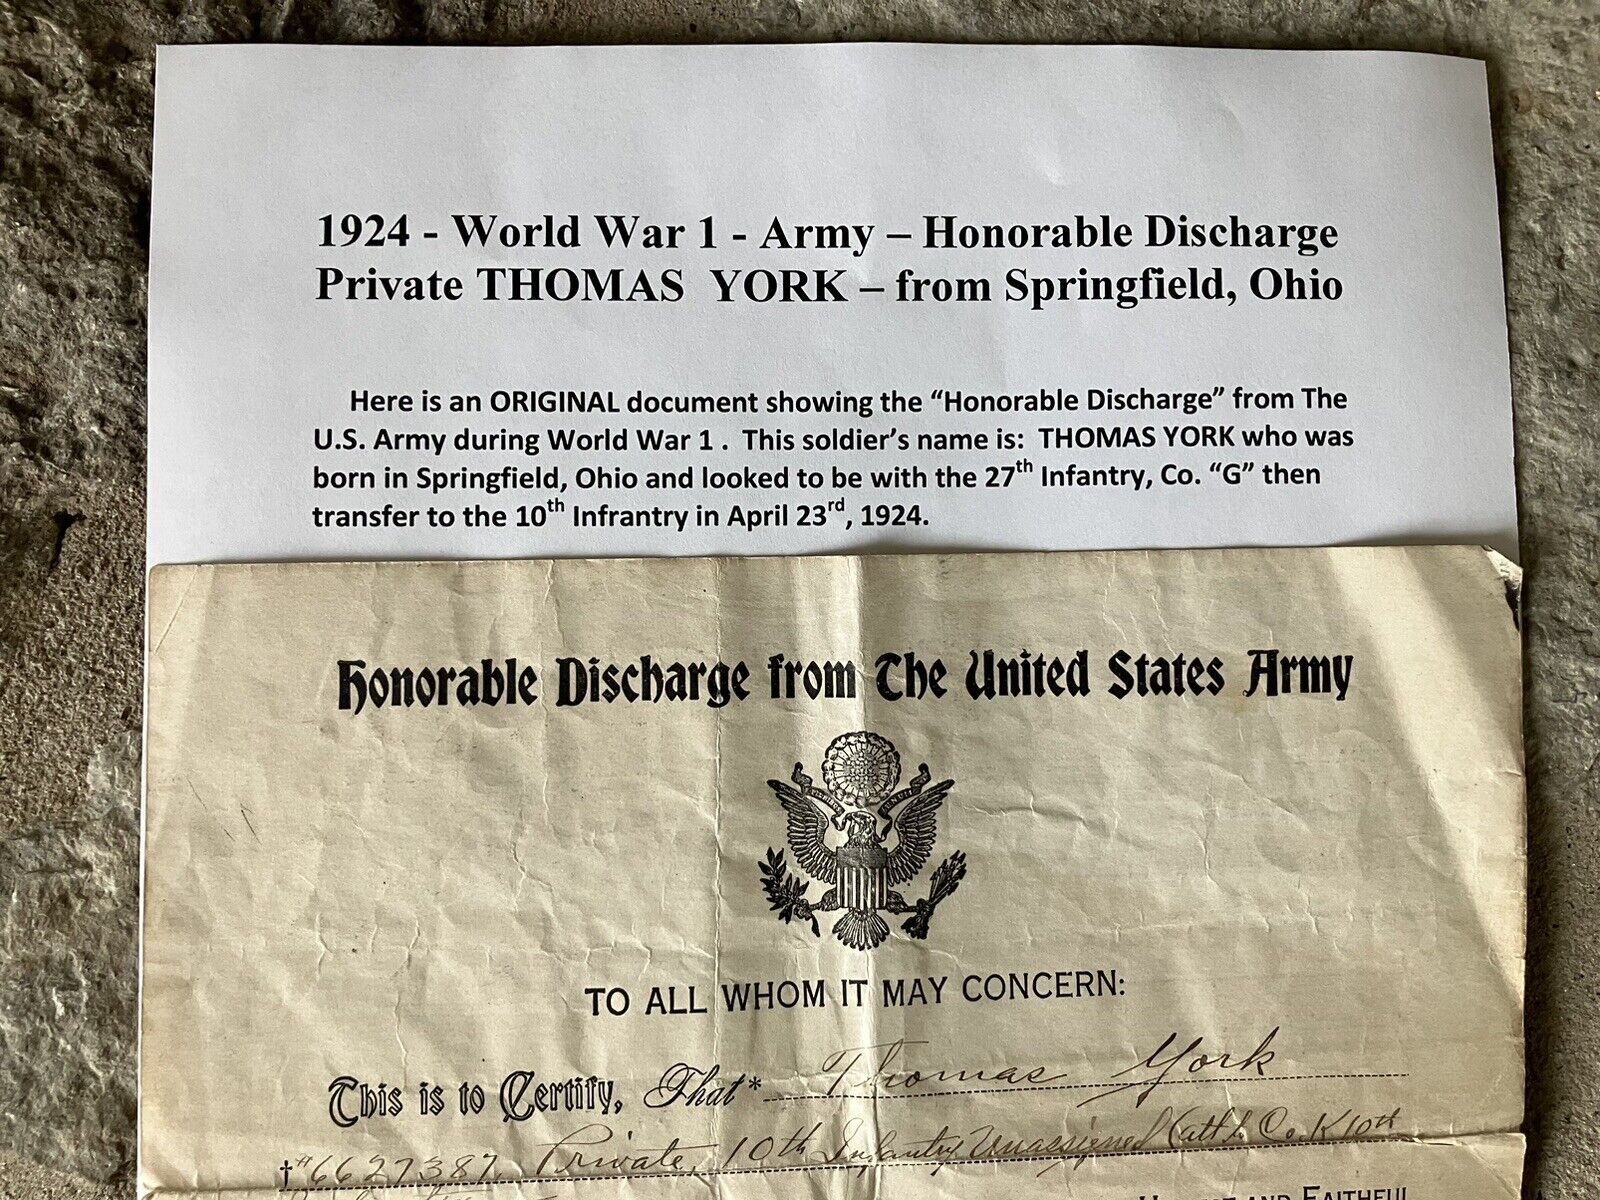 1924 - WW1 - HONORABLE DISCHARGE - Private THOMAS YORK from Springfield, OH